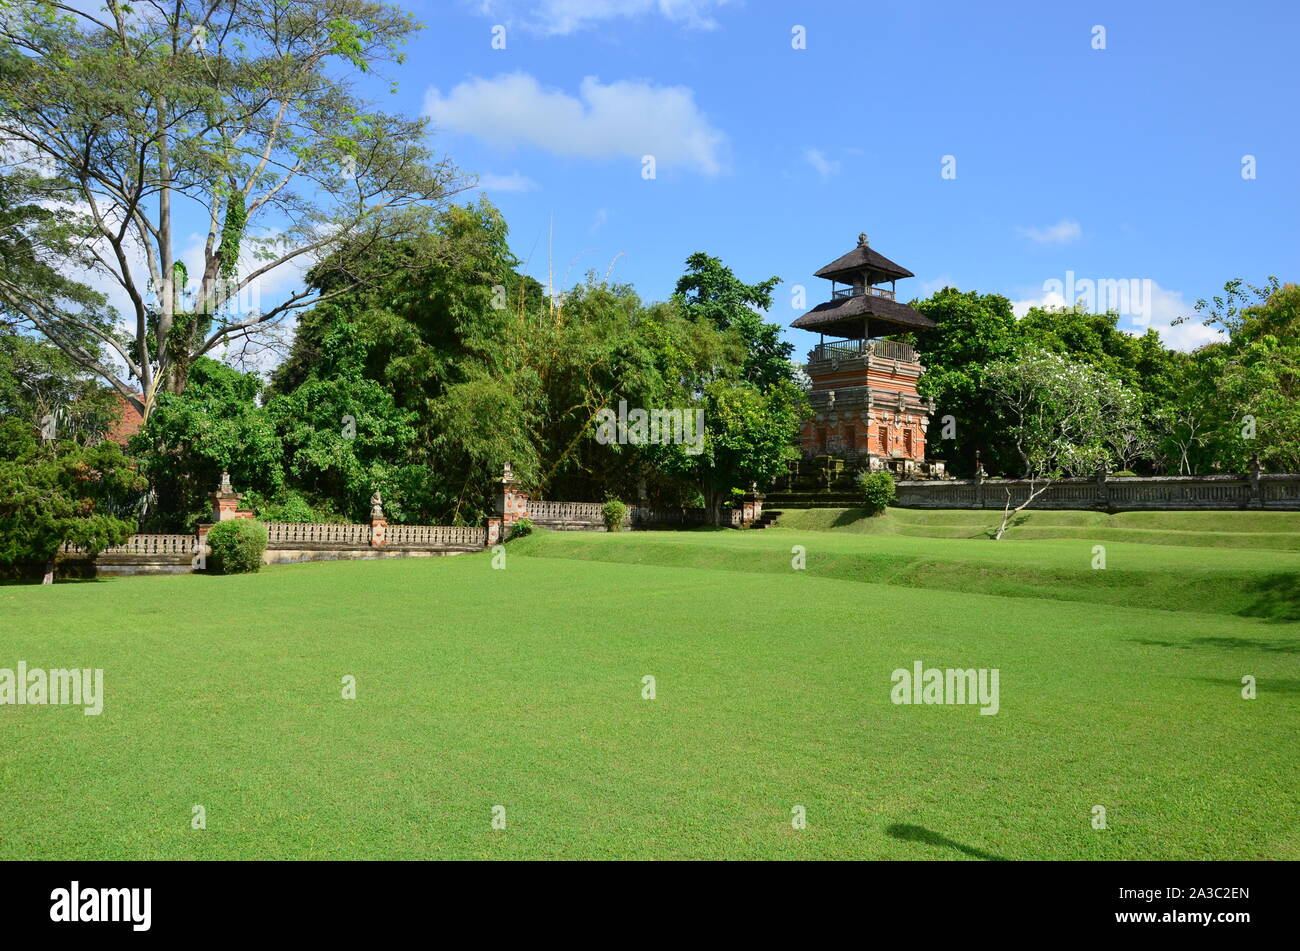 The view of the ancient temple in Asia Stock Photo